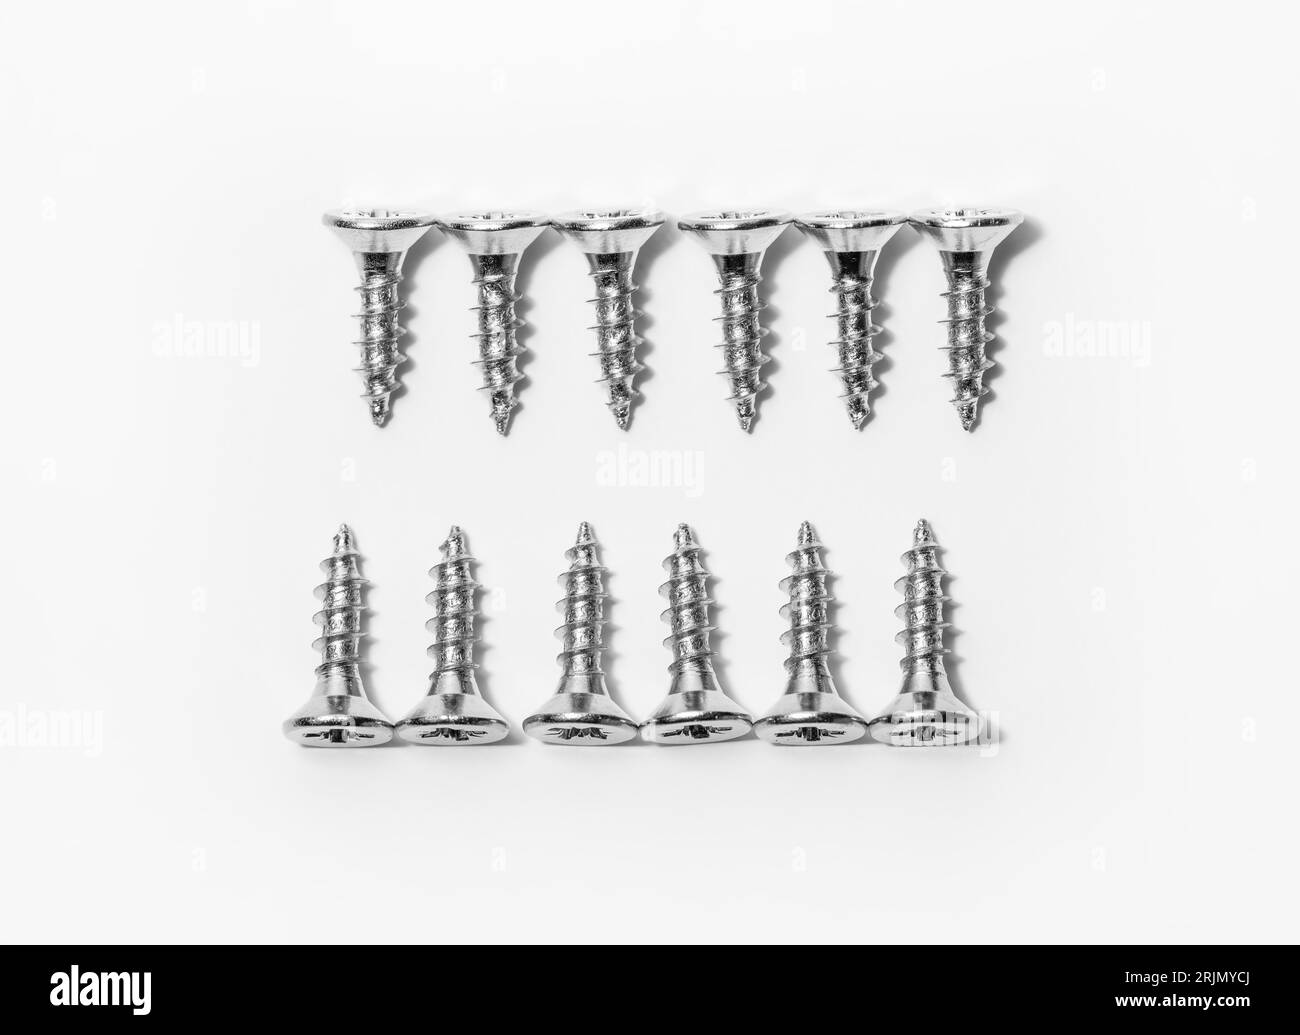 Set of screws on a white background banner with space for text. Construction tools, self-tapping screws for fastening. Black screw hardware. Stock Photo